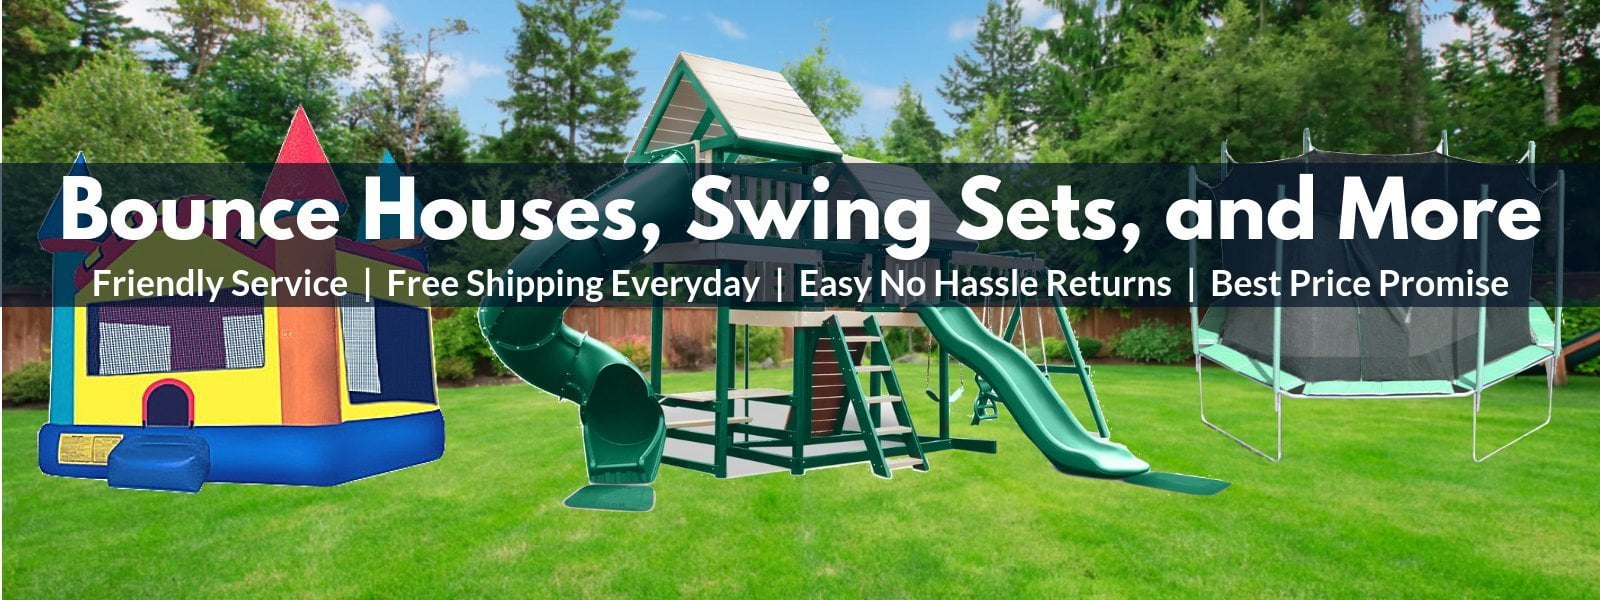 bounce houses, swing sets, and outdoor play equipment